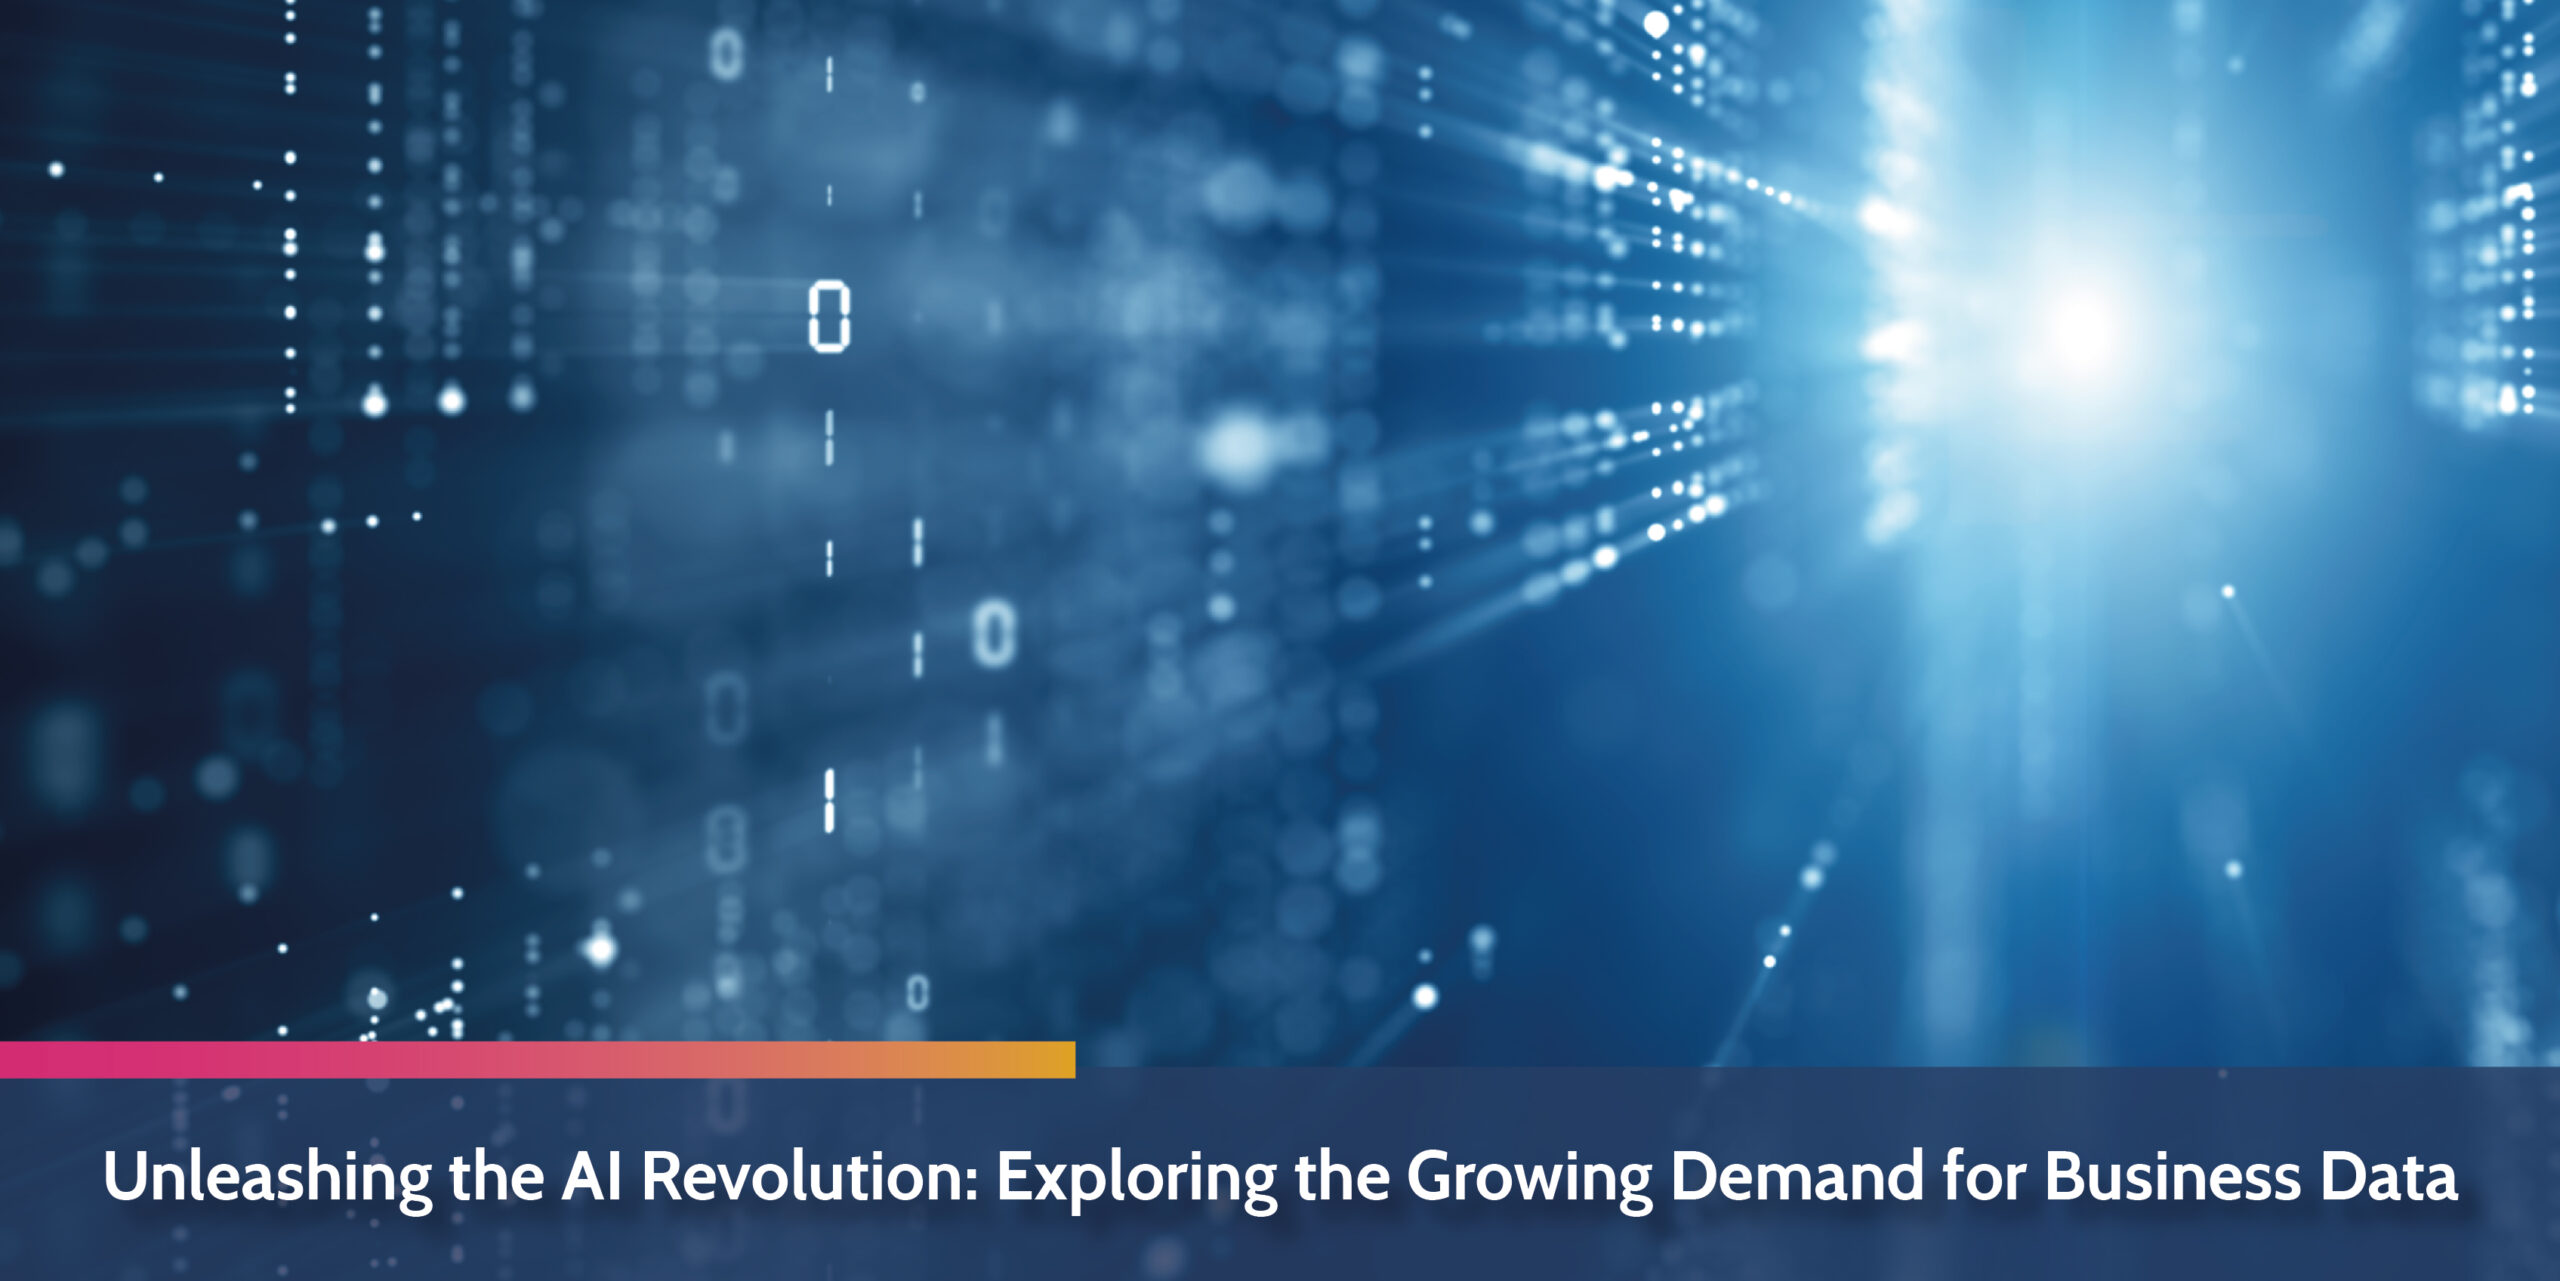 Unleashing the AI Revolution: Exploring the Growing Demand for Business Data